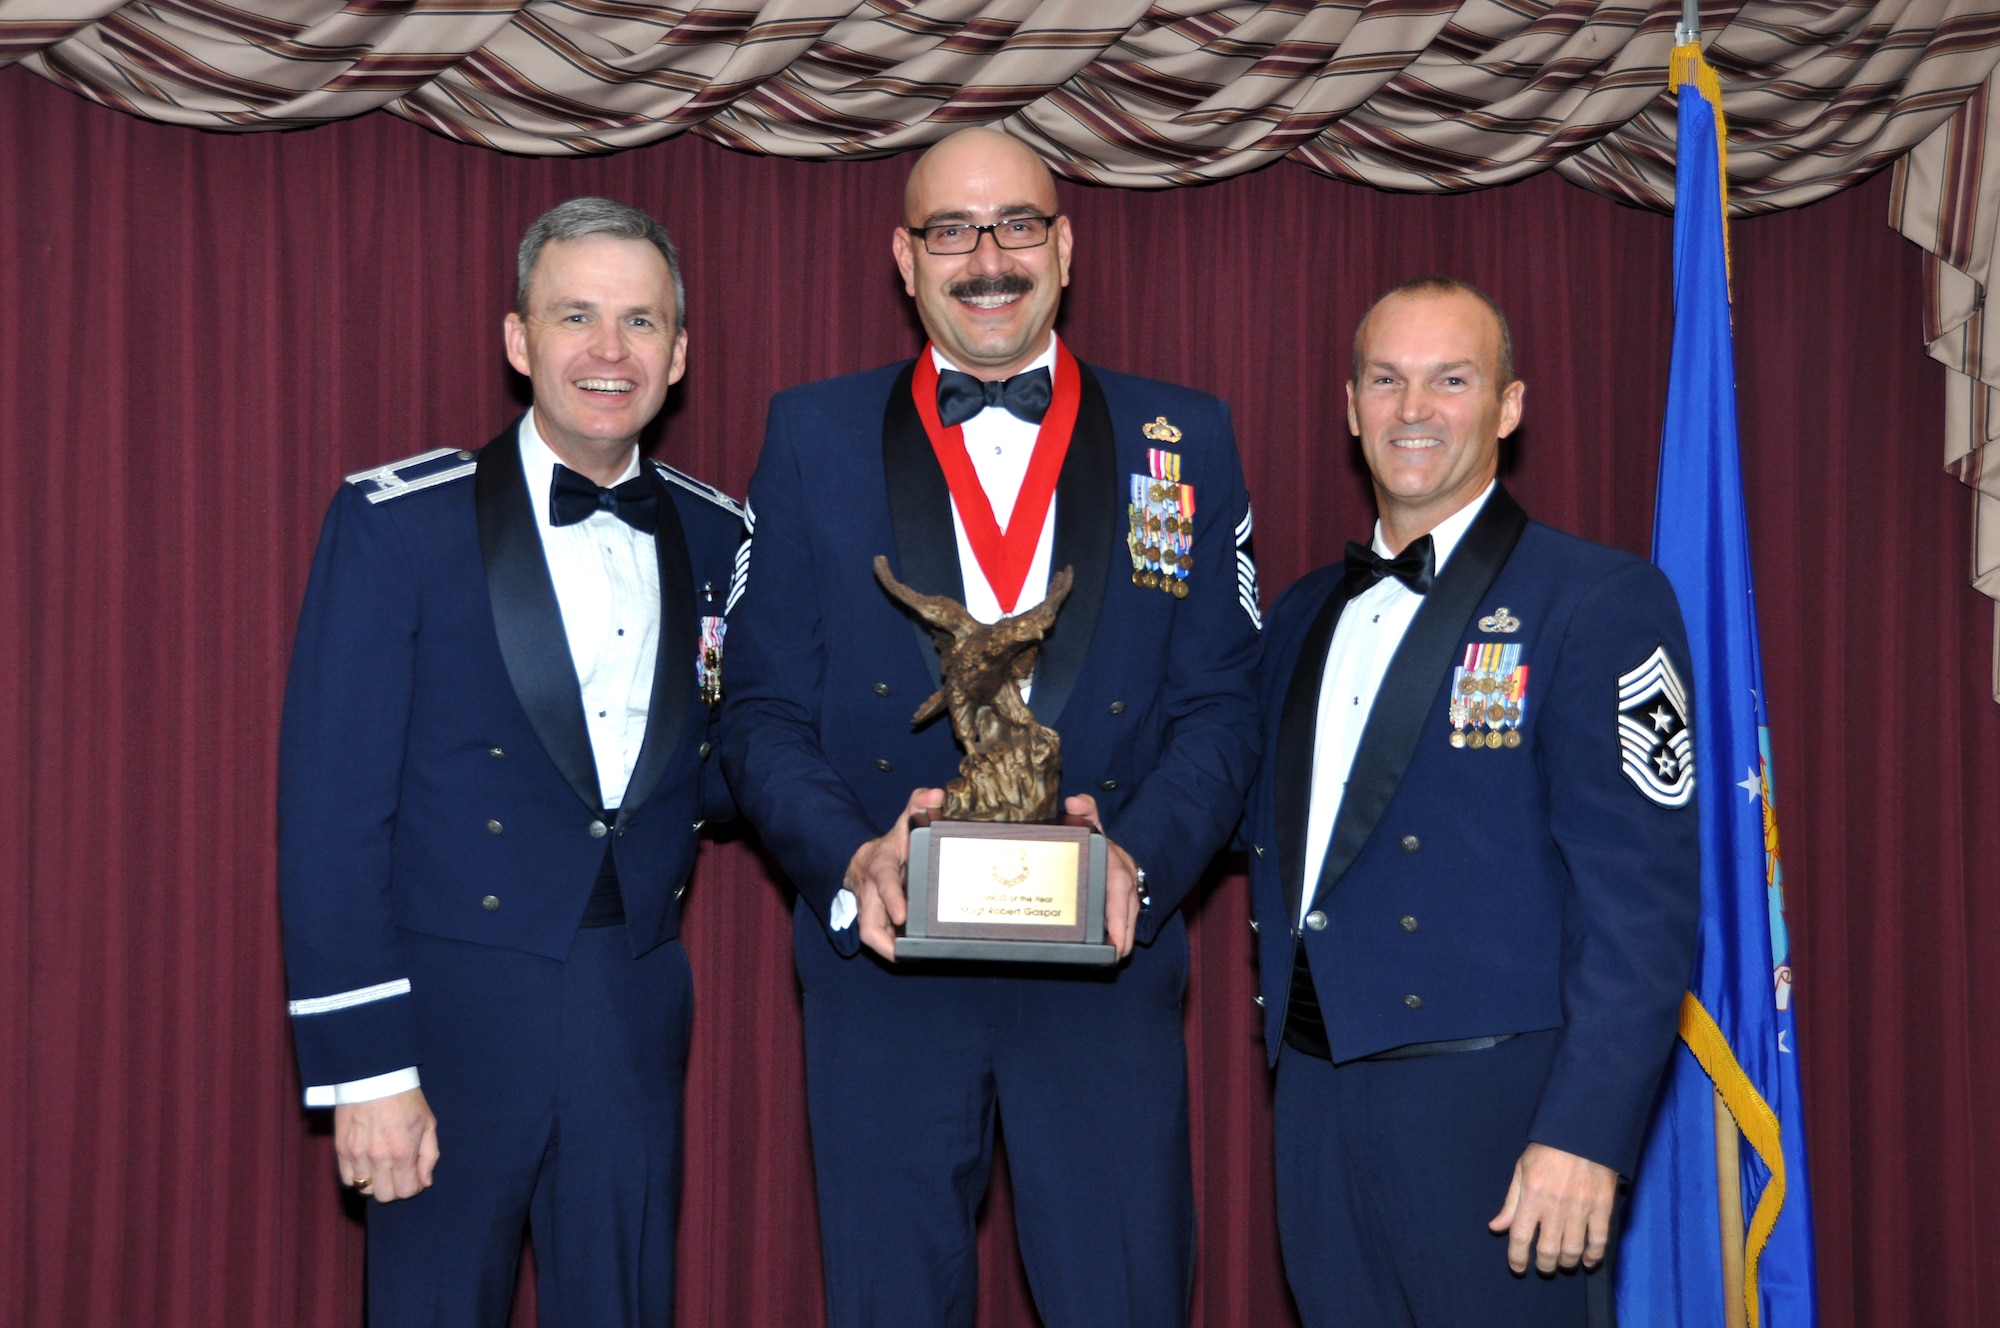 Senior Master Sgt. Robert Gaspar receives the Senior Non-Commissioned Officer of the Year Award from 507th Air Refueling Wing acting Commander, Col. Kevin Trayer, left and 507th ARW Command Chief, Chief Master Sgt. Steven Brown during the annual awards banquet at the Tinker club Nov. 23, 2013.  (U.S. Air Force photo/Senior Airman Mark Hybers)